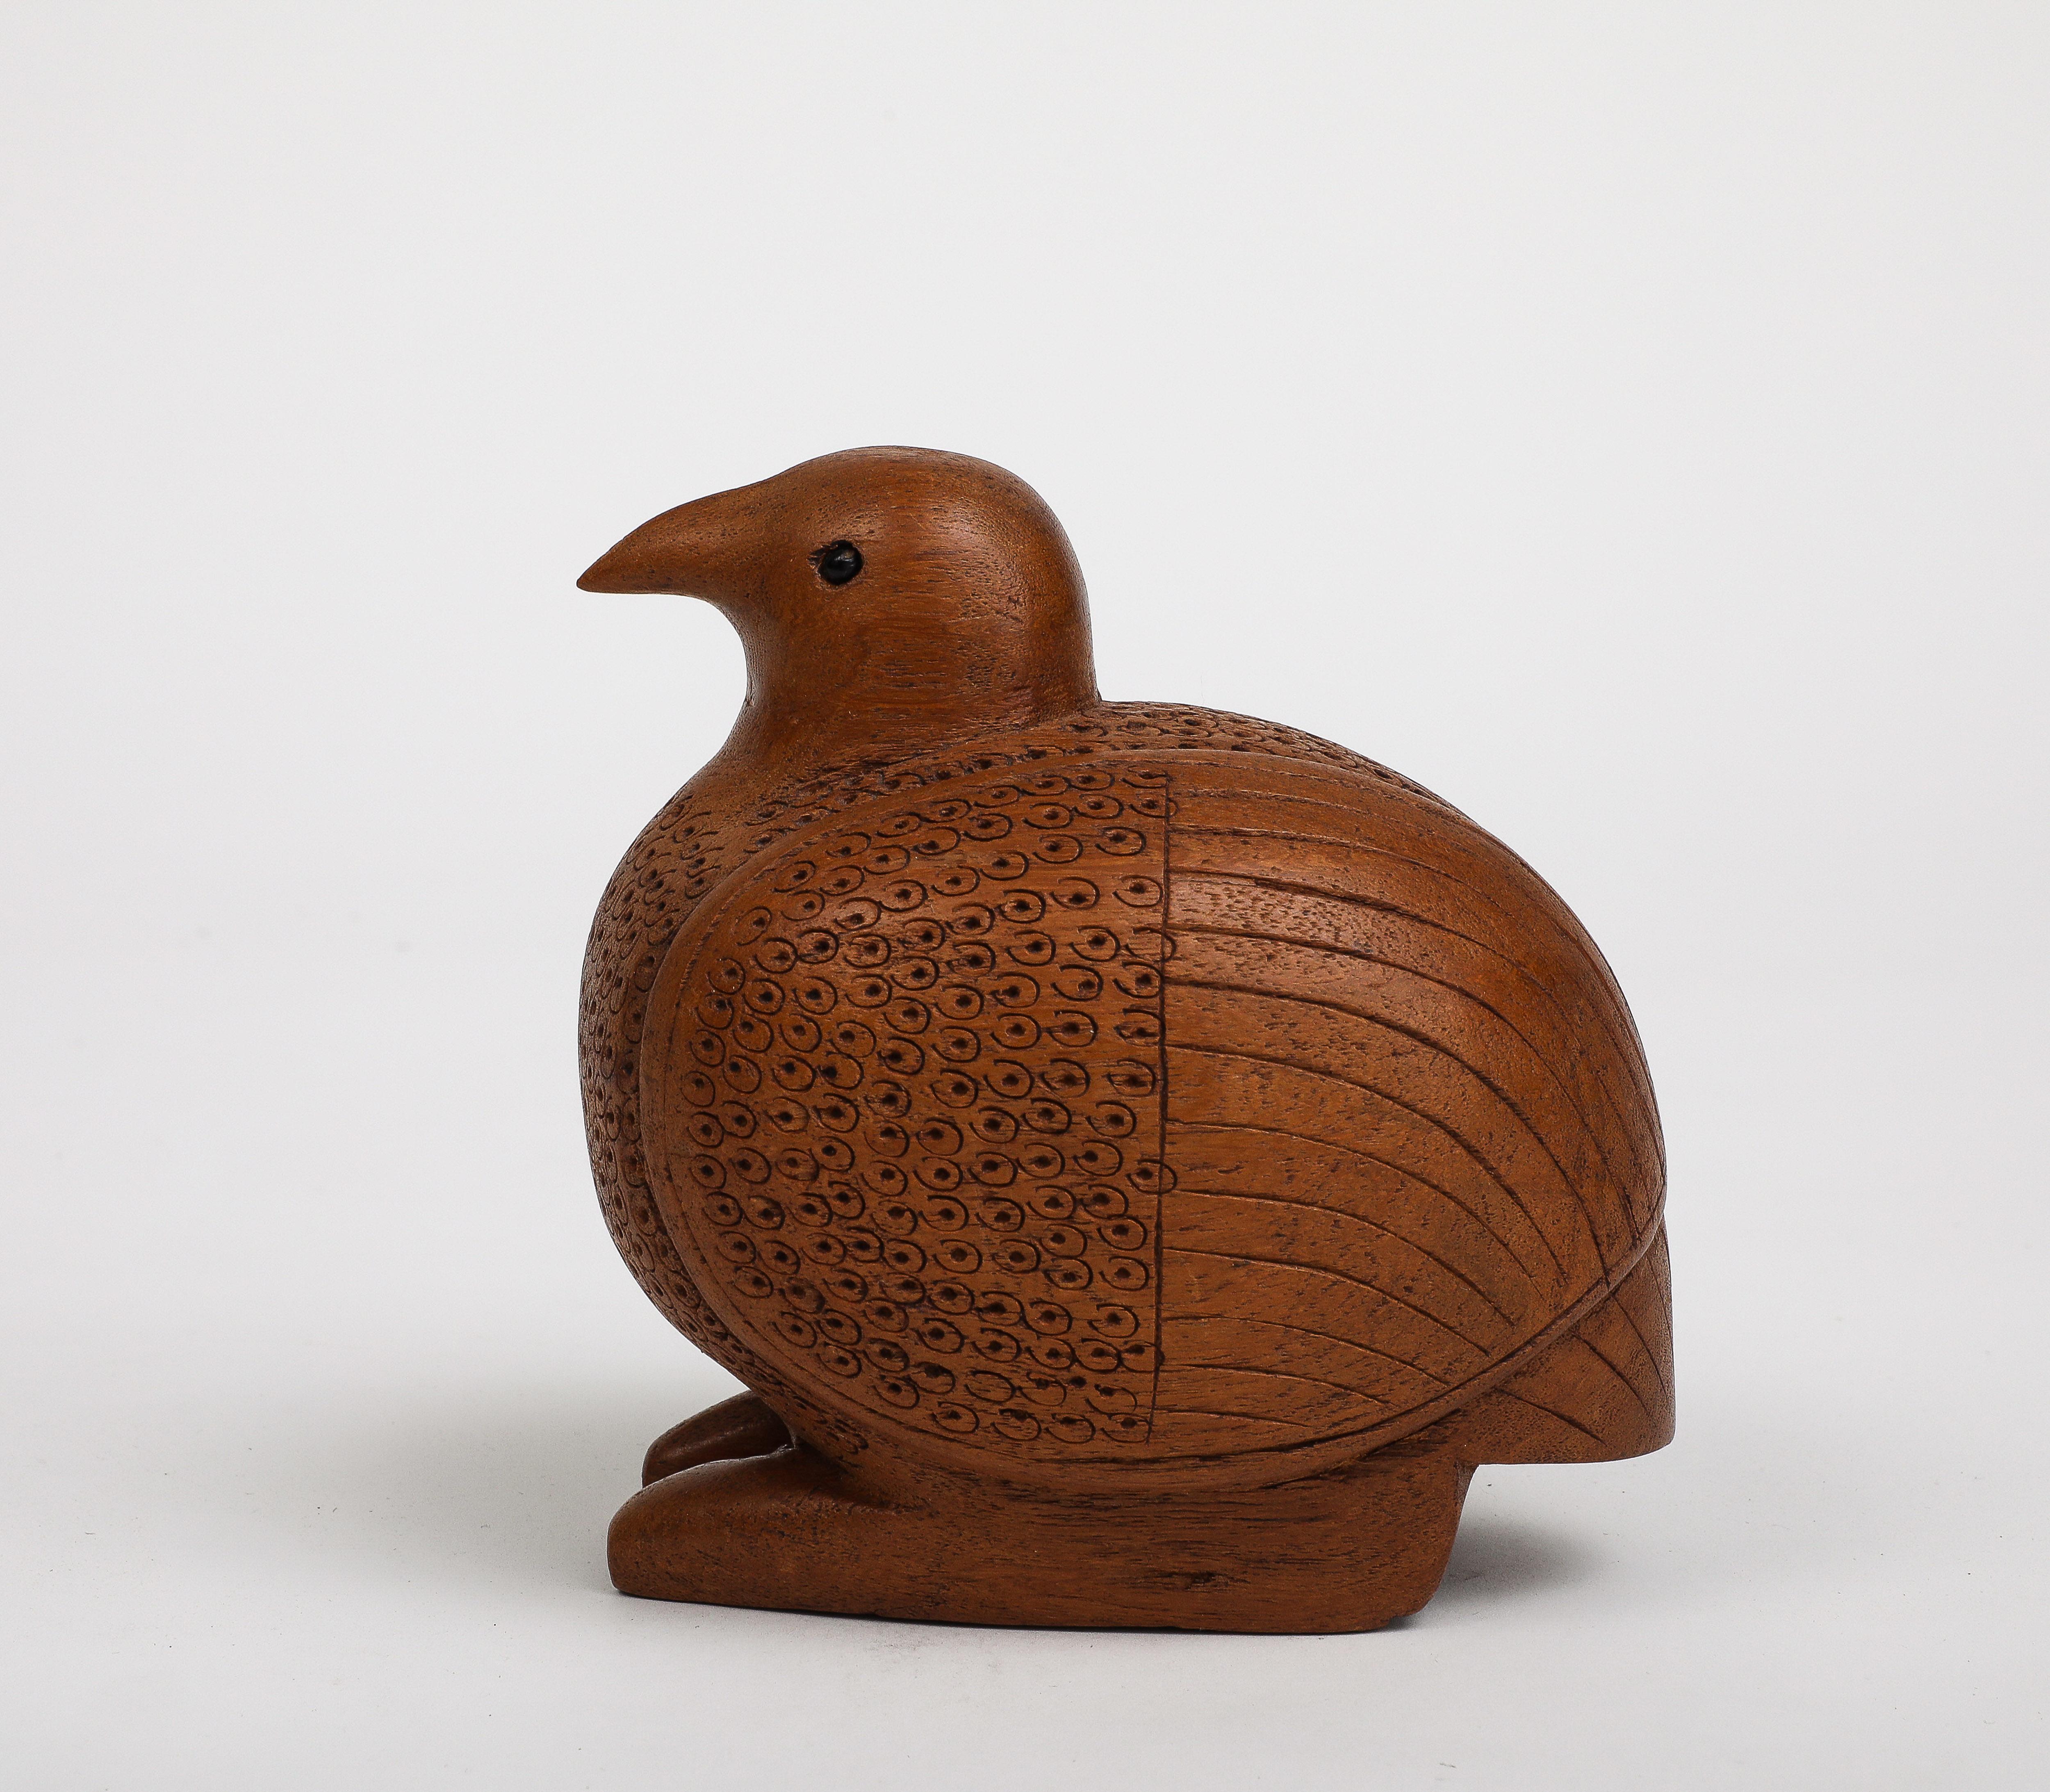 Midcentury Danish hand-carved wooden bird, circa 1950. Rounded body shape with feather-like carvings on the breast and wings. Black bead eyes. 